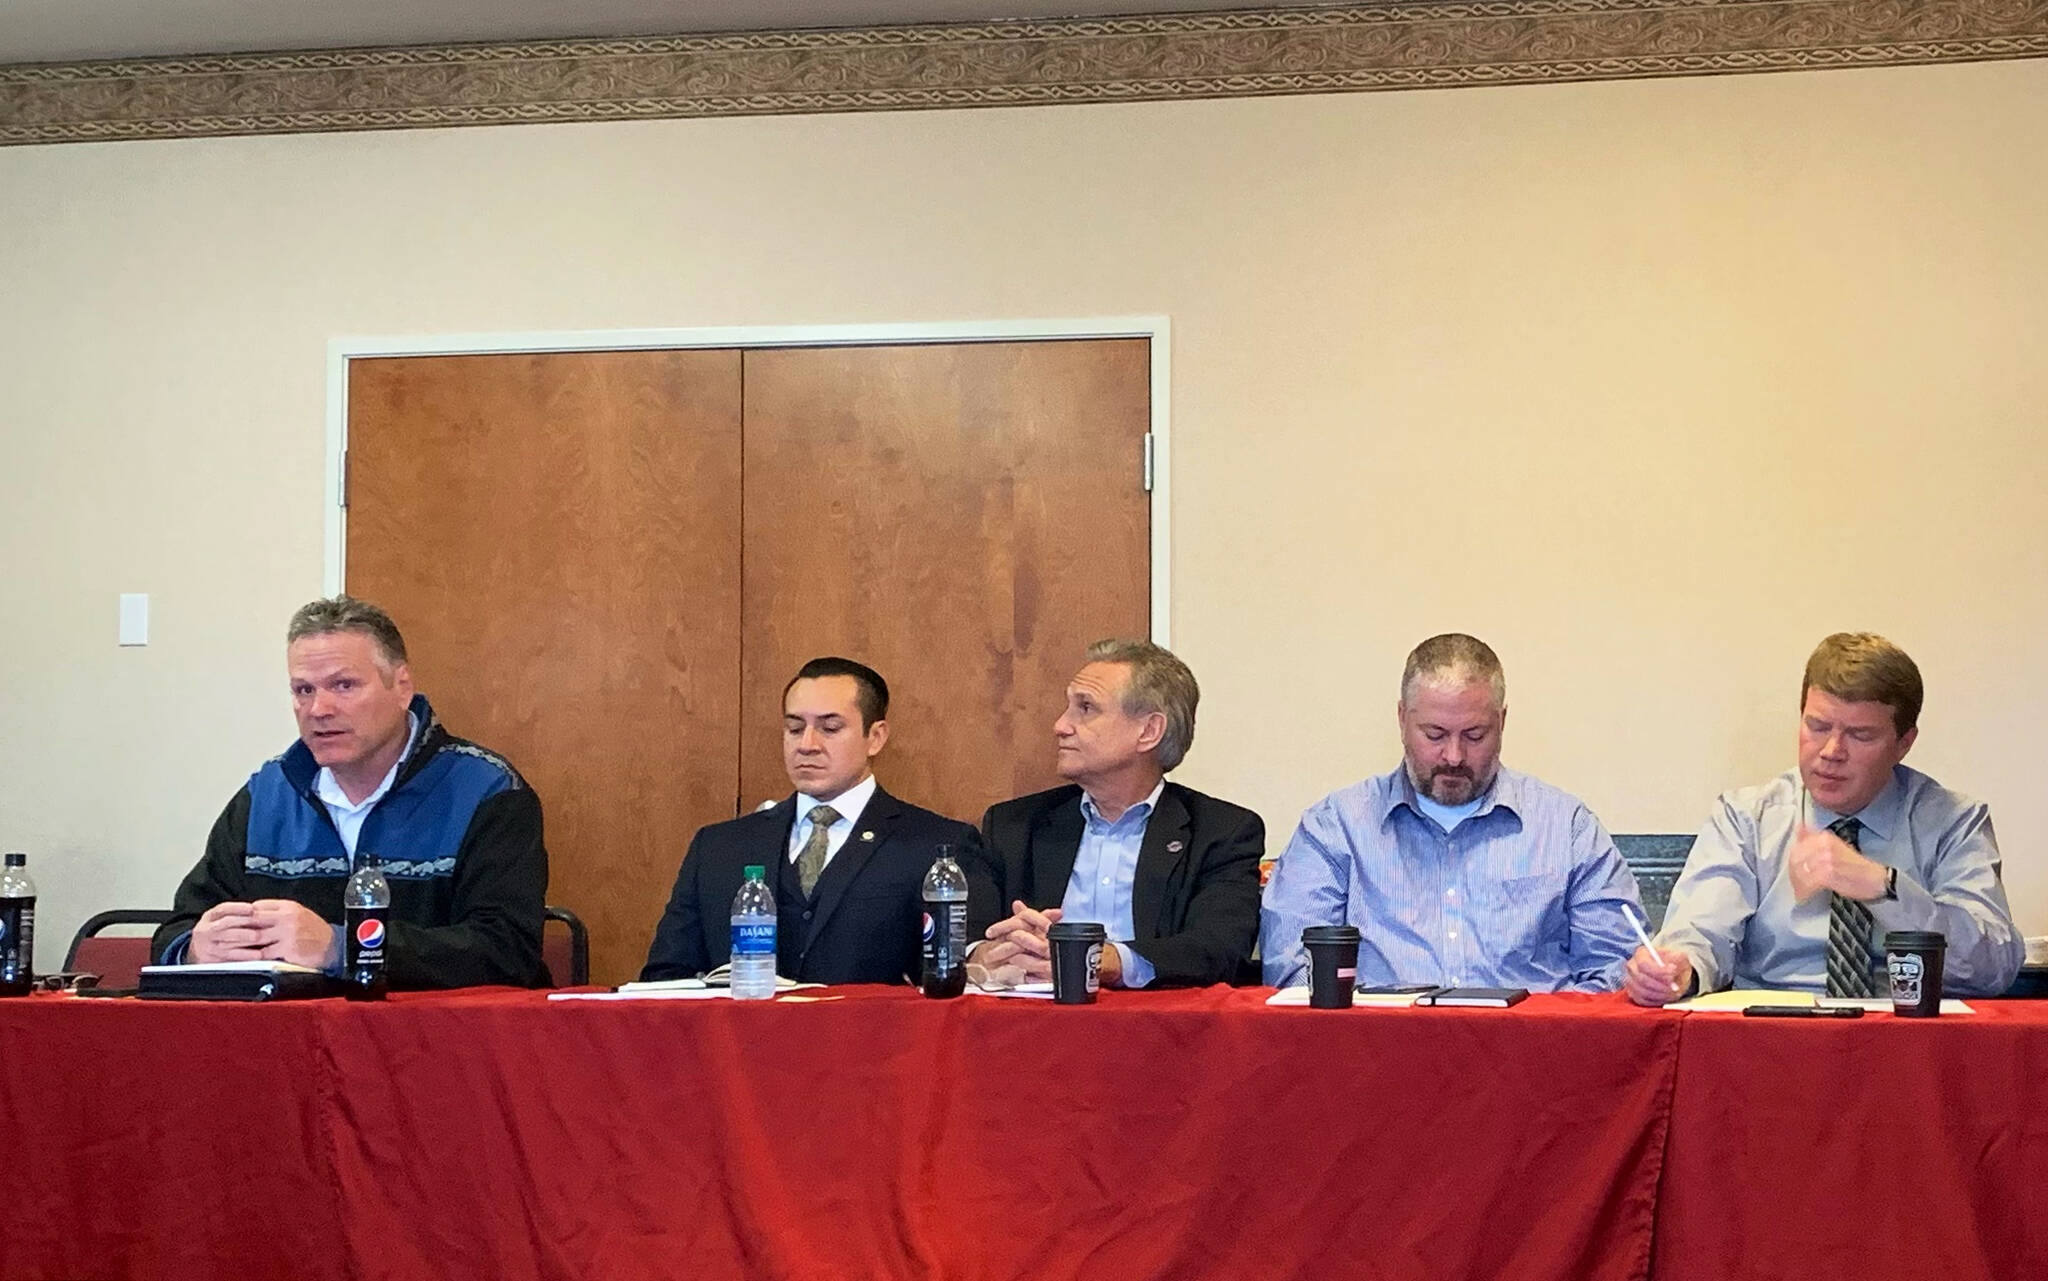 Gov. Mike Dunleavy speaks at a meeting with members of his cabinet at the Aspen Hotel on Tuesday, September 28, 2021, in Soldotna, Alaska. (Ashlyn O’Hara/Peninsula Clarion)